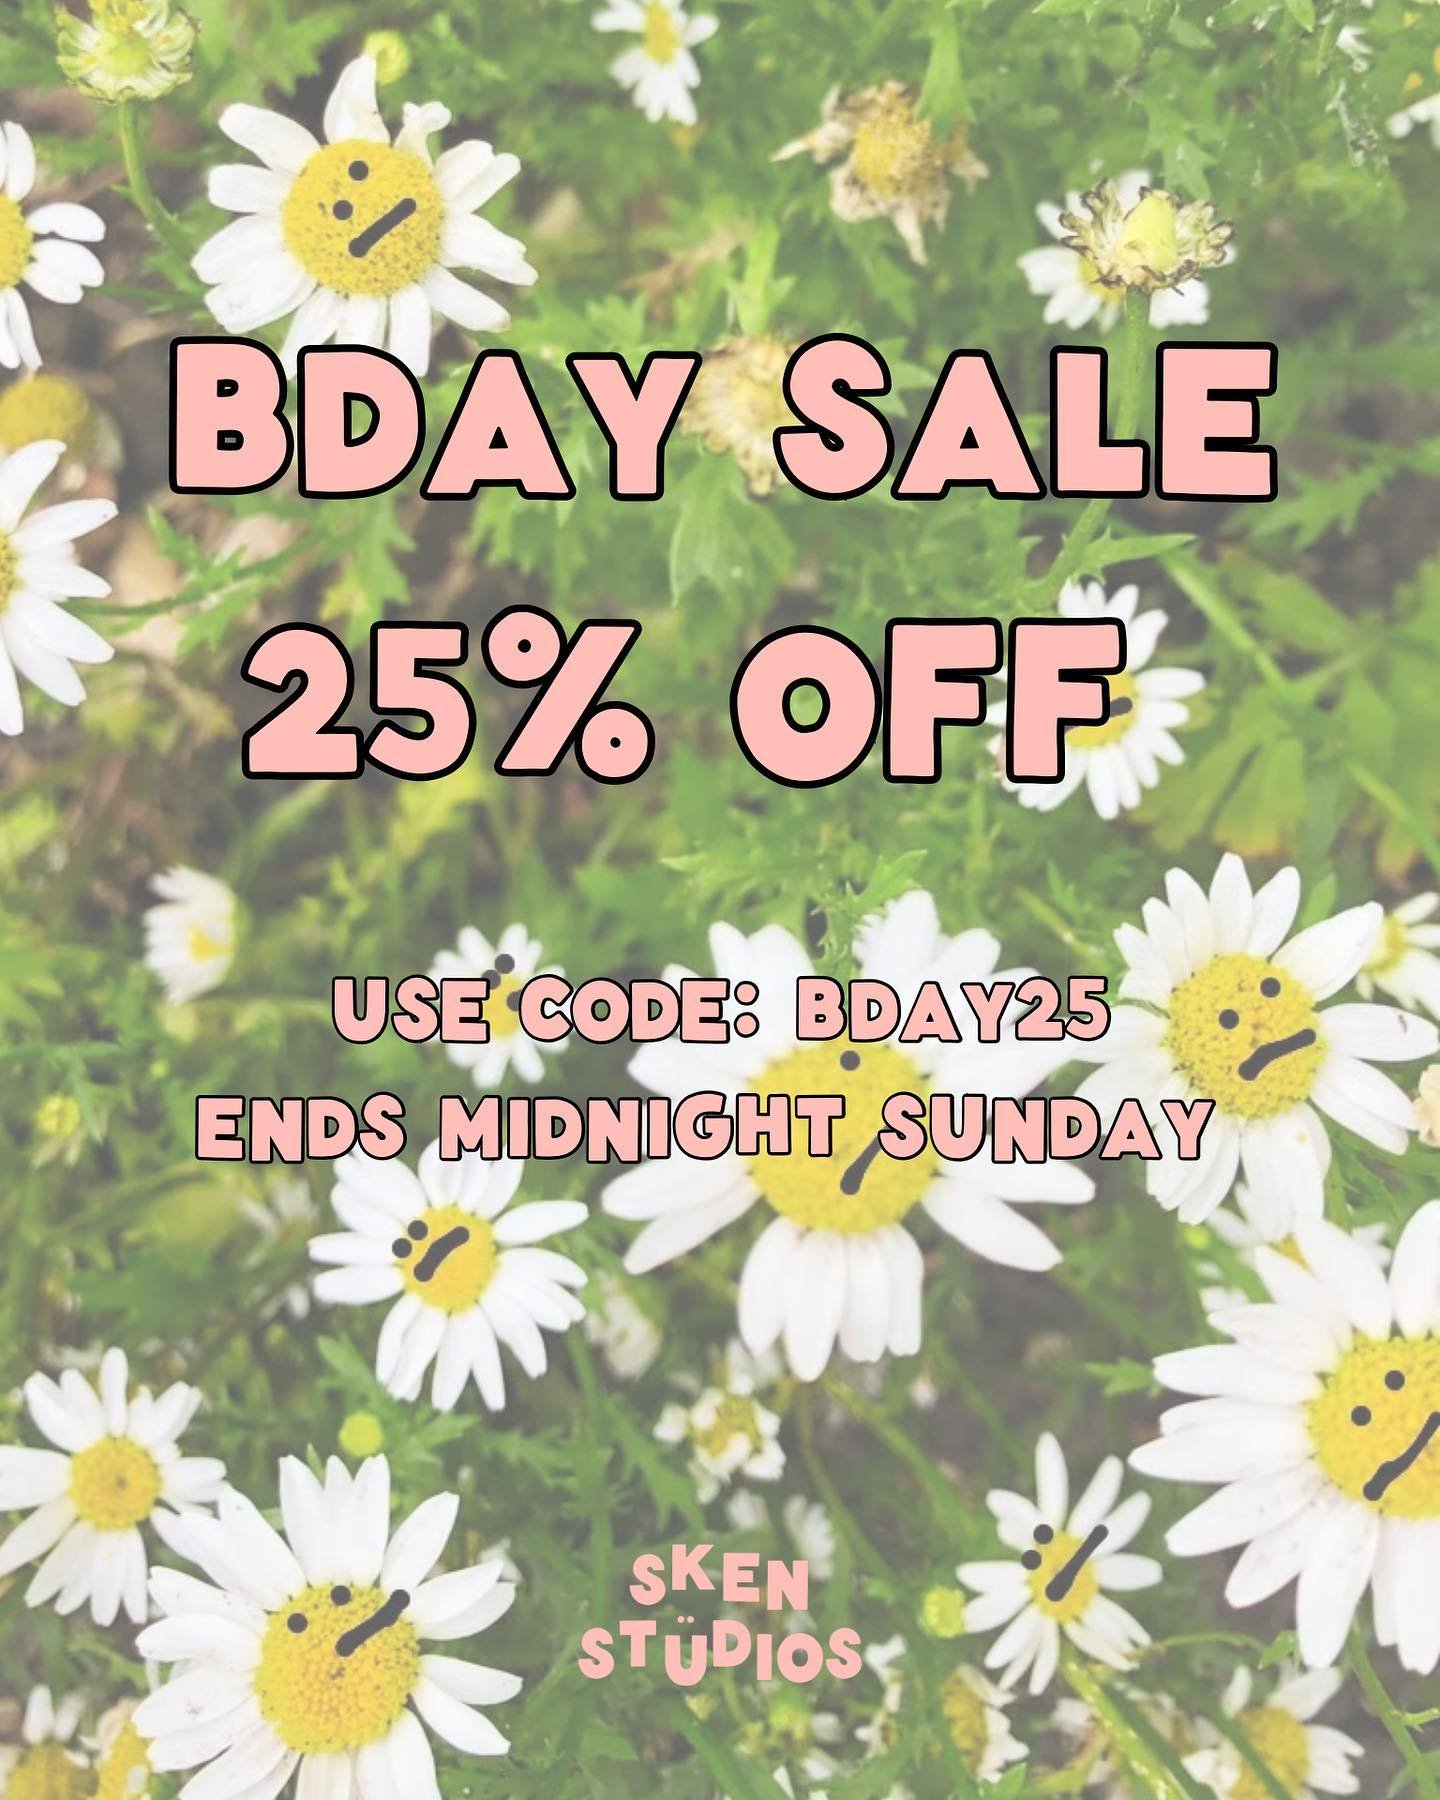 It&rsquo;s our birthday 🎈 a big massive THANK UUUUU to customers new and old. You&rsquo;re the actual best and allow me to live my jewellery dreams and work for myself full time 🥲🥲🥲🥲🥲🥲🥲🥲🥲 have a oh so cheeky 25% off with BDAY25 until midnig